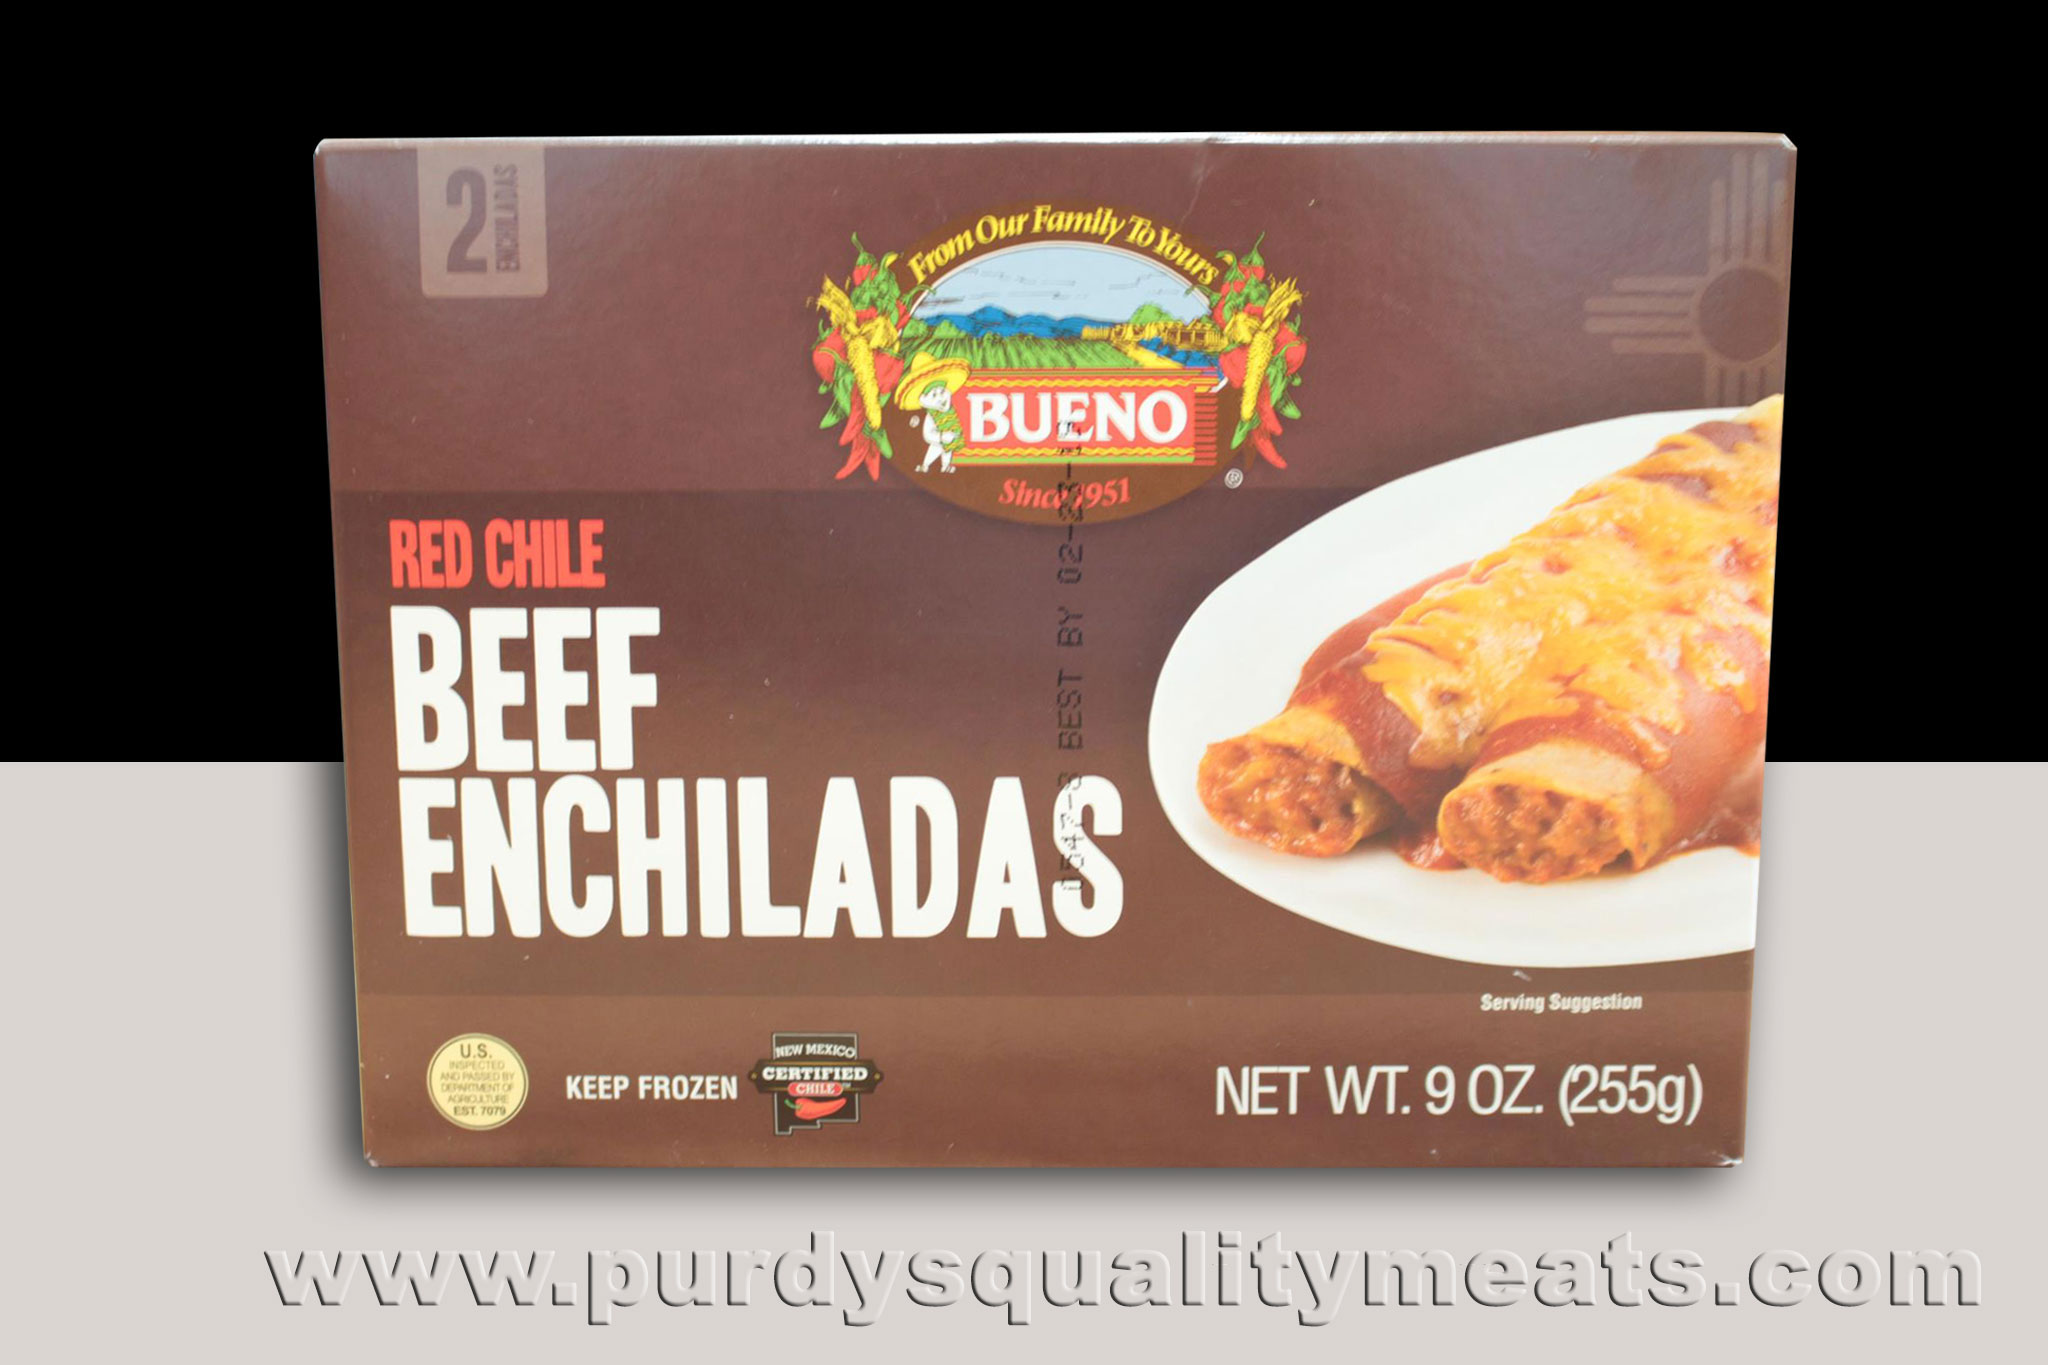 This image icon displays the Purdy's Quality Meats Red Chile Beef Enchiladas image